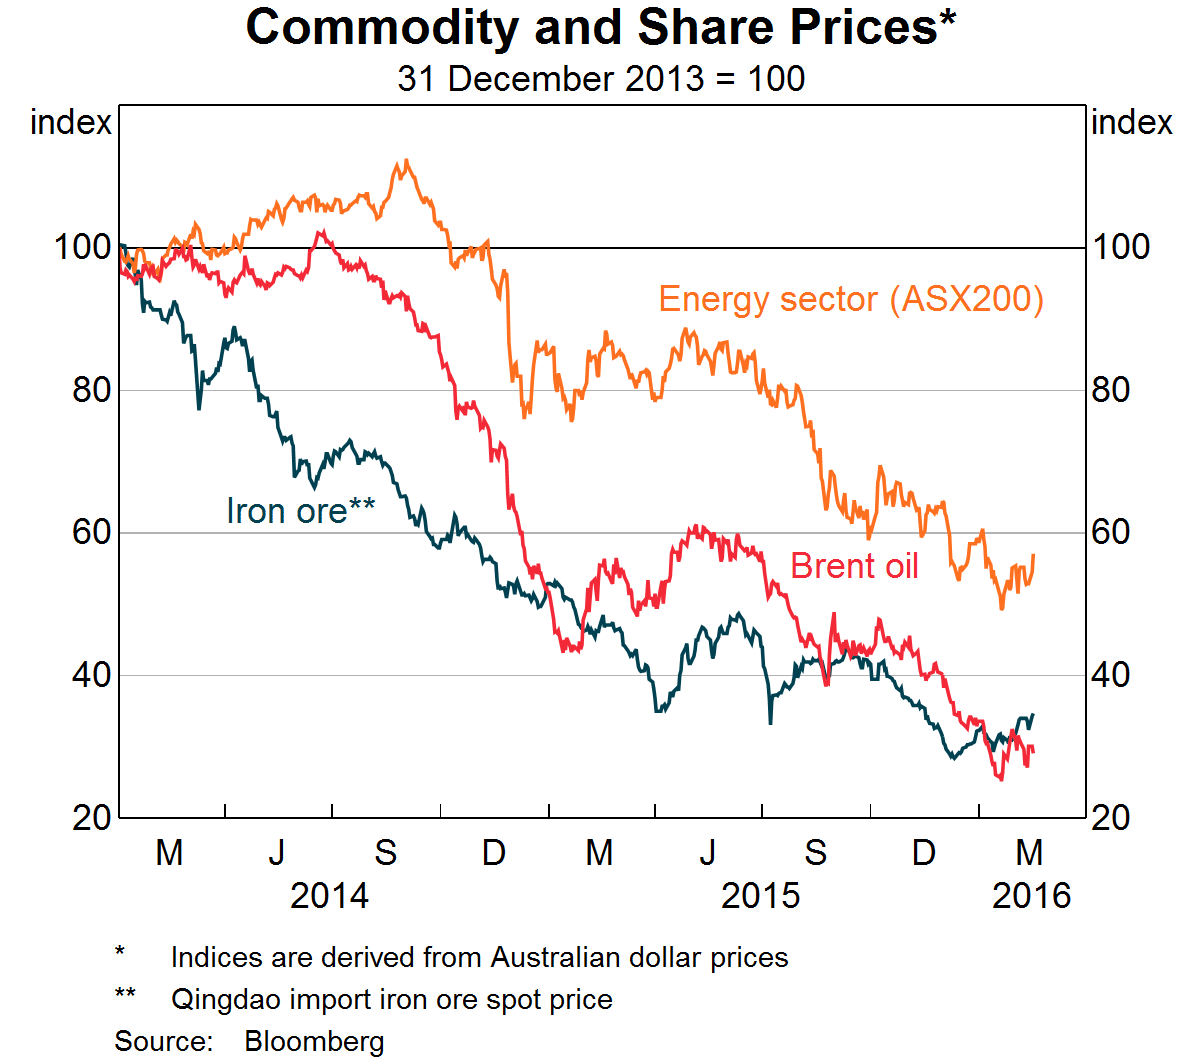 Graph 4: Commodity and Share Prices